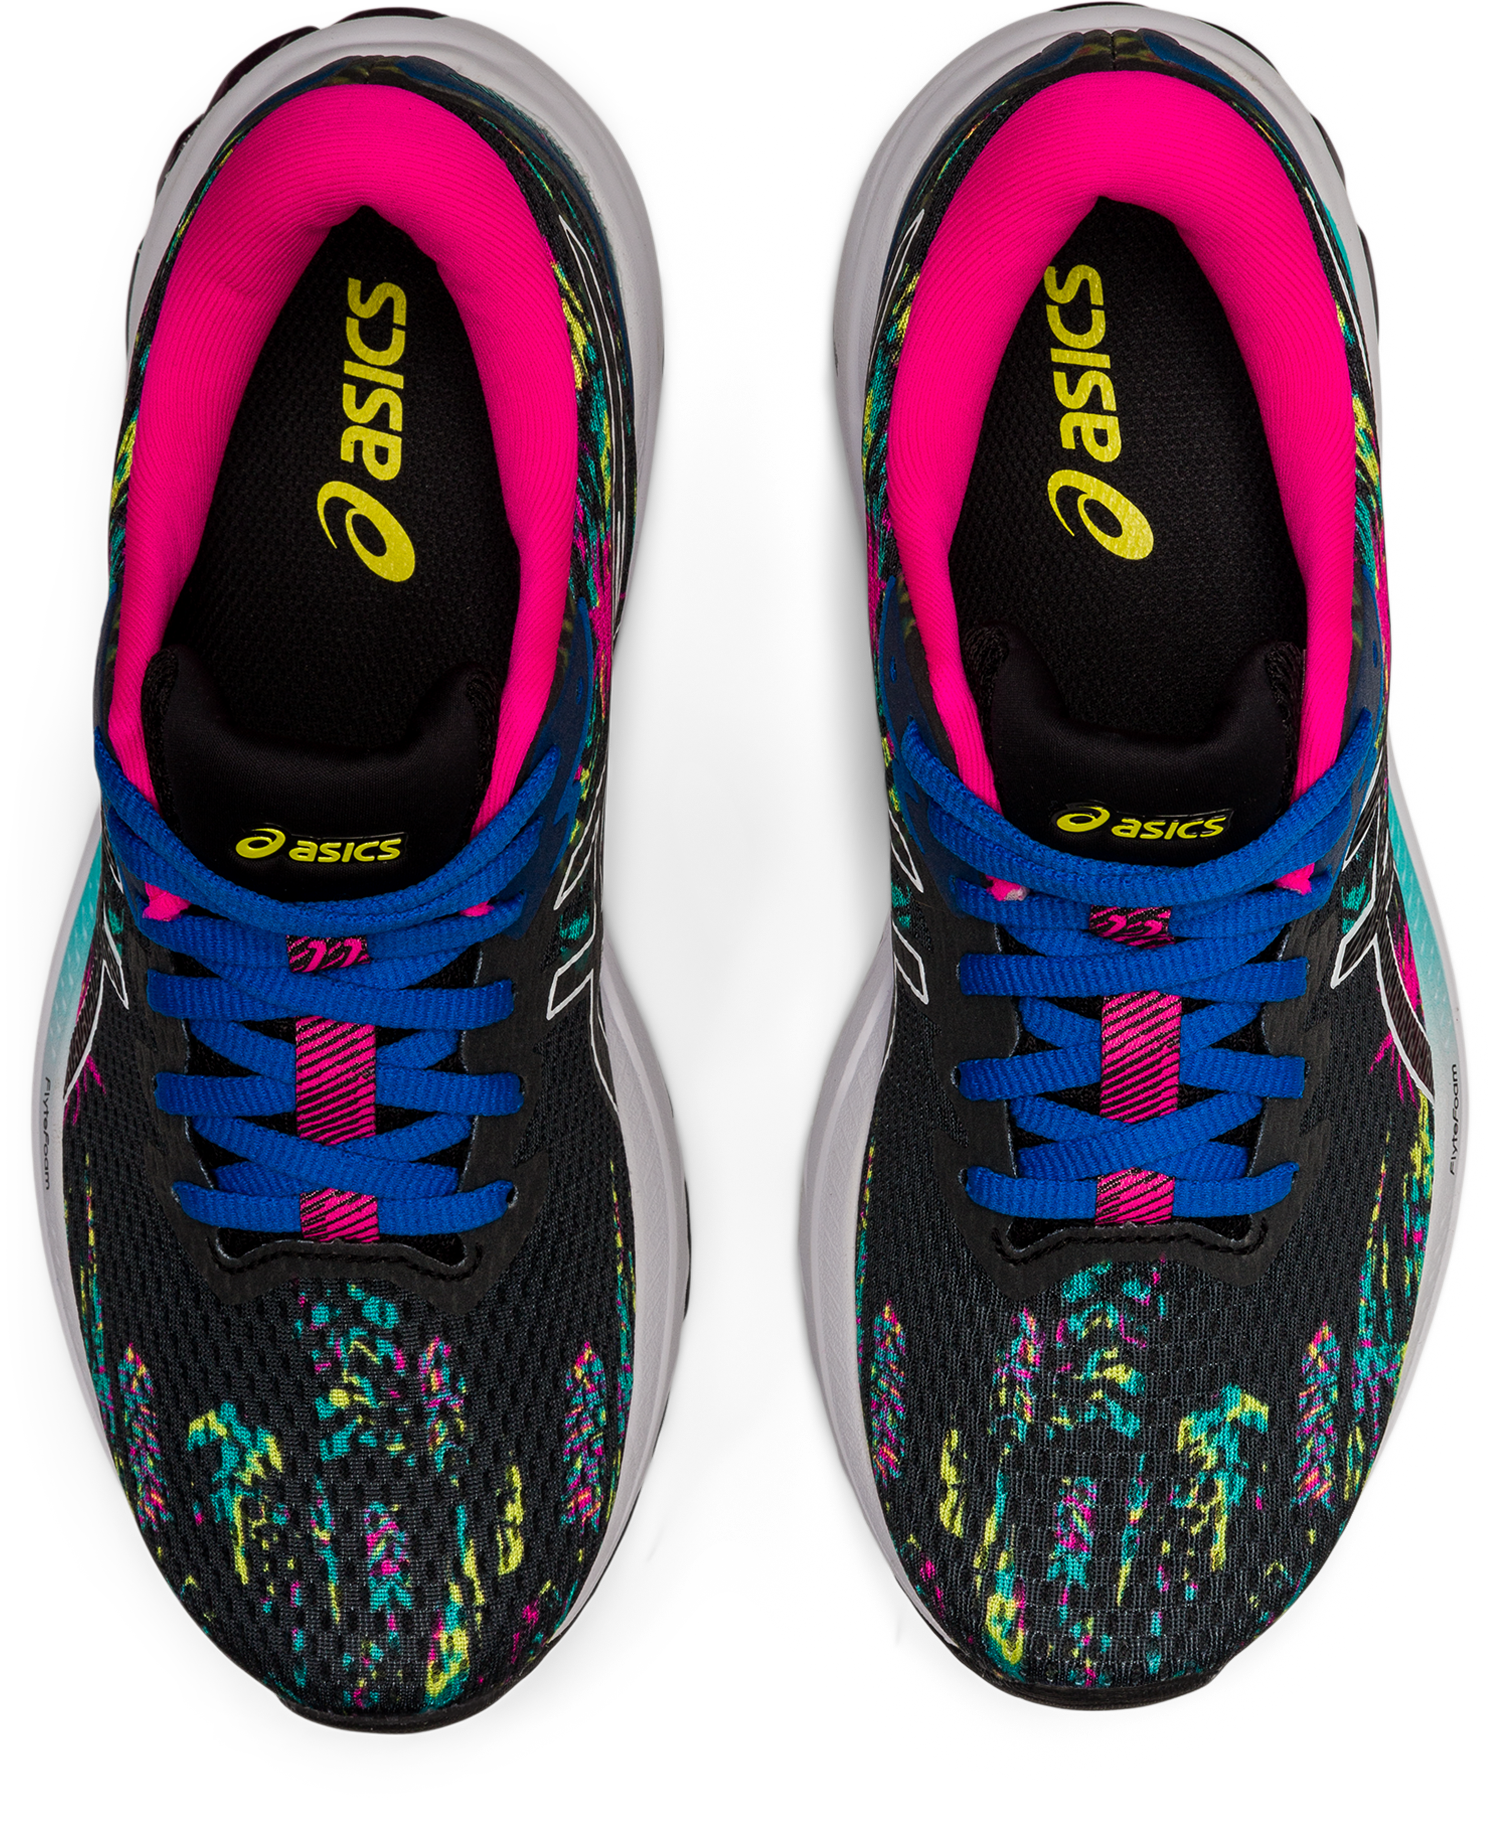 Asics Women's GT-1000 11 Running Shoes in Black/Pink Glo